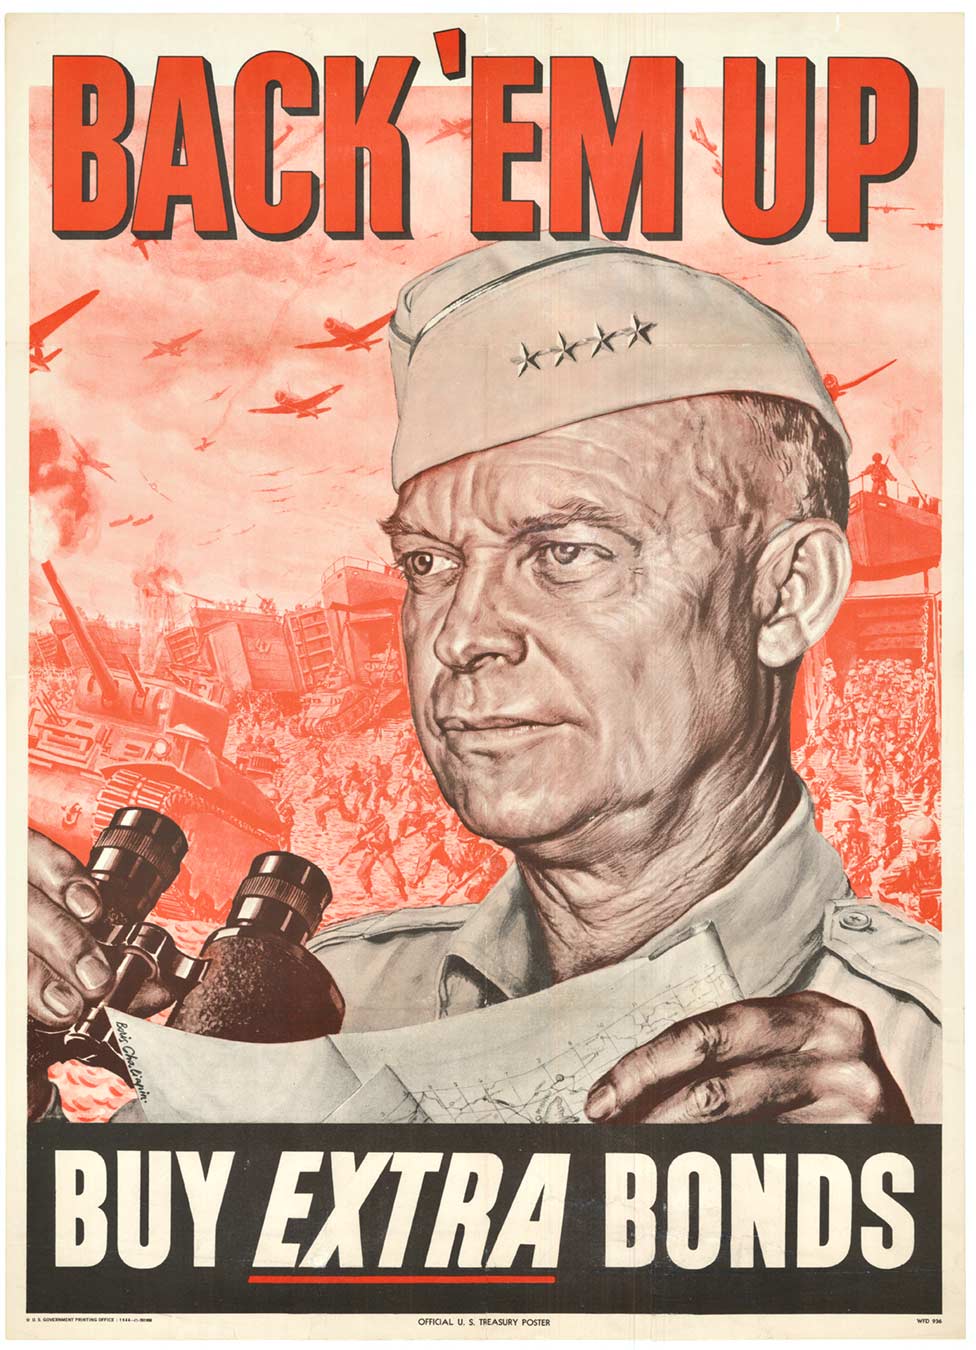  The striking design features a powerful image of D-day, tanks, airplanes, and the legendary 4 Star General Eisenhower holding binoculars and a map. Display this iconic poster in your home or office to commemorate the bravery and sacrifice of those who fo